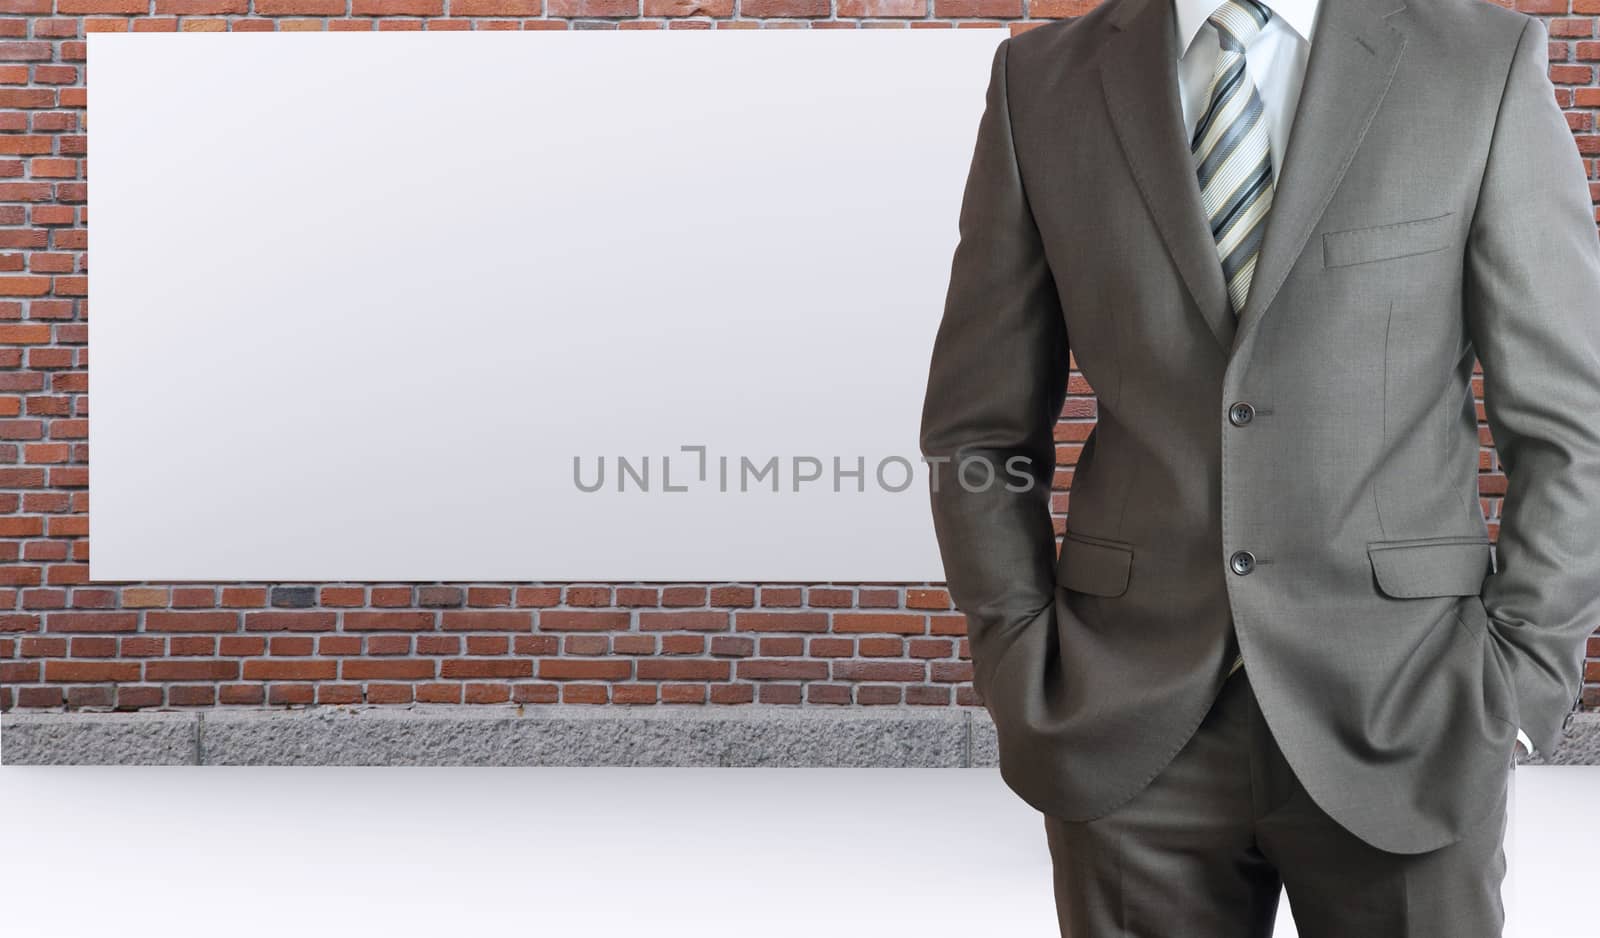 Businessman standing with hands in pockets. Brick wall and white placard as backdrop